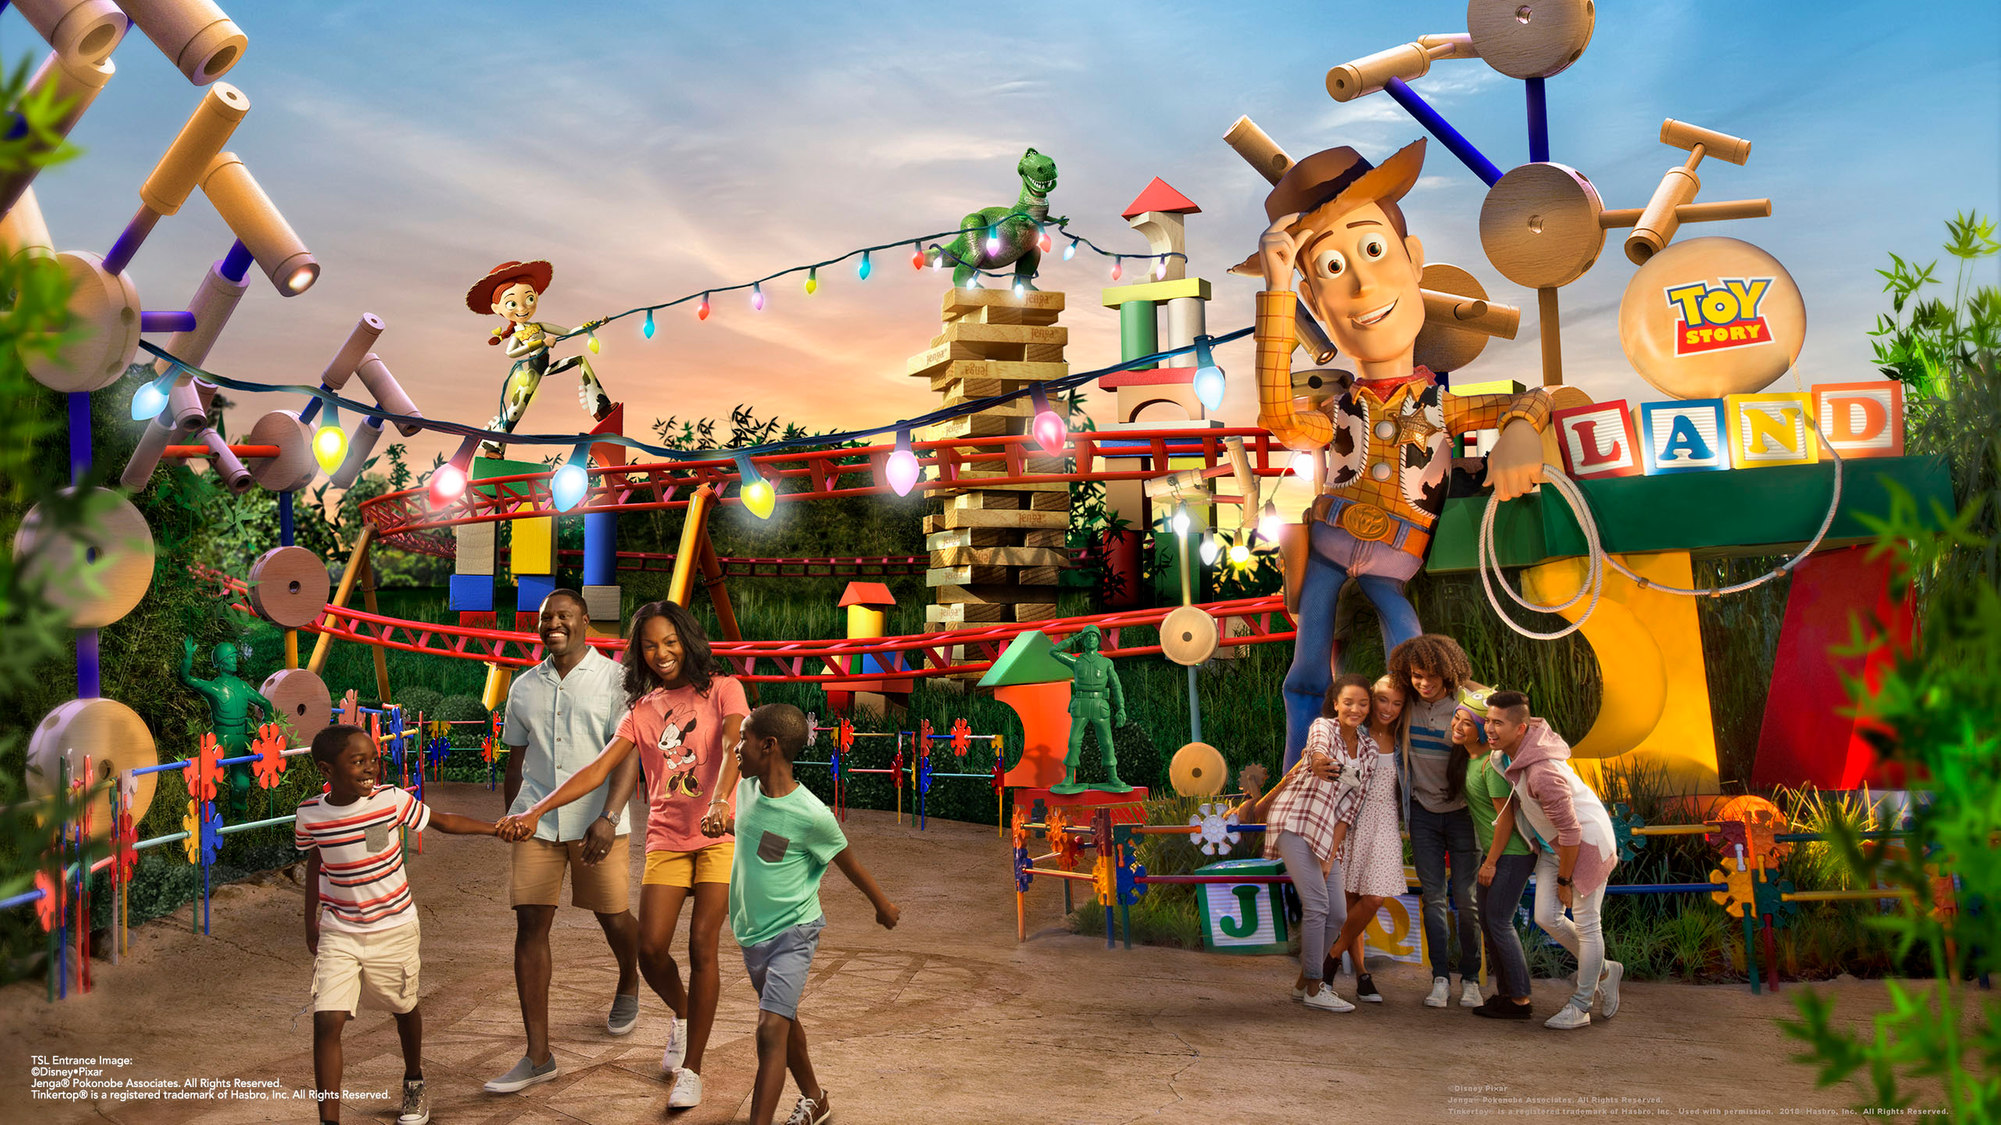 Families at Toy Story Land entrance featuring Woody, Jessie and friends at Disney's Hollywood Studios.